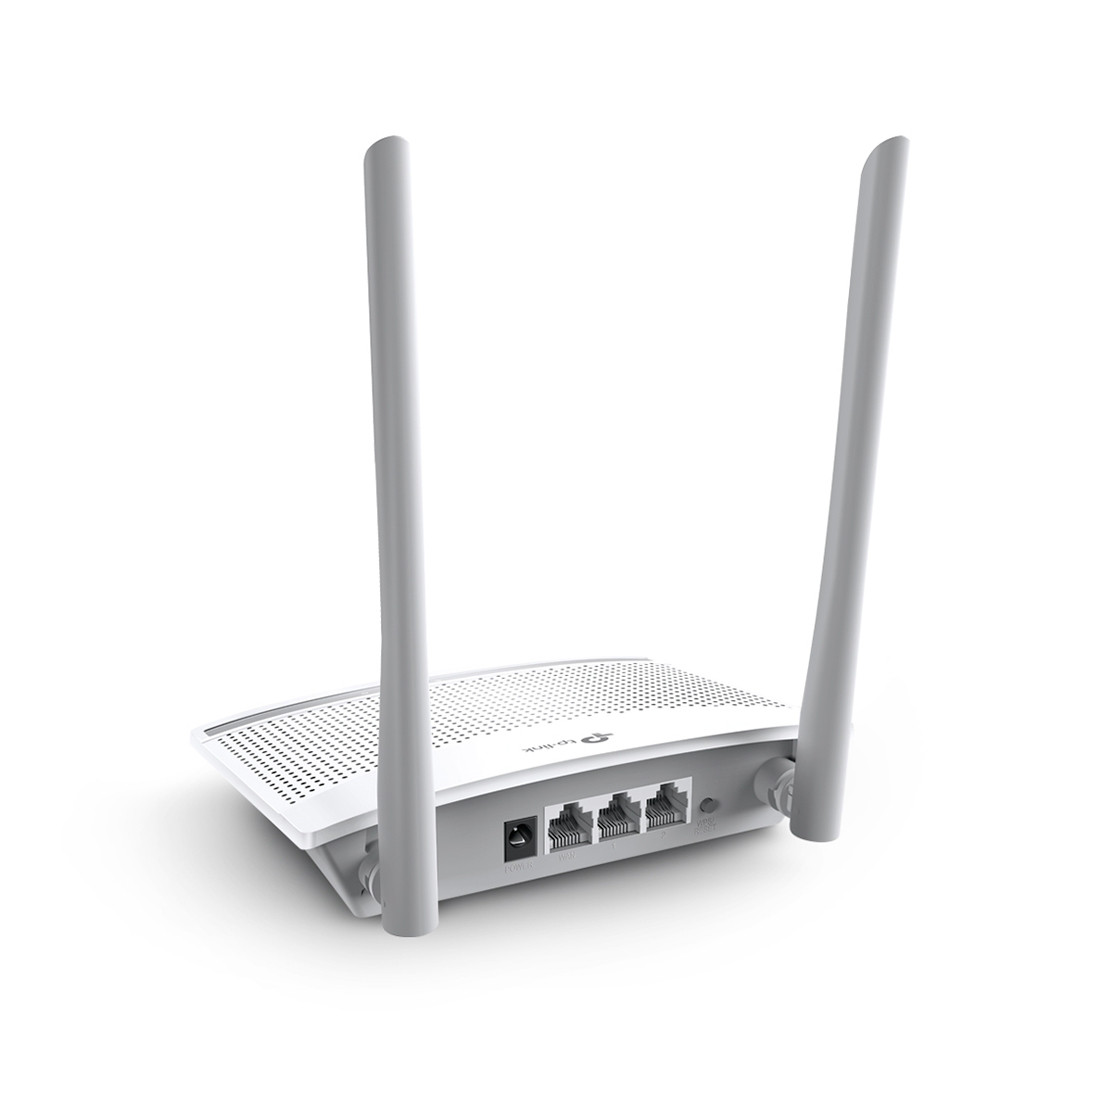 Маршрутизатор TP-Link TL-WR820N (Маршрутизаторы) - фото 2 - id-p115007369